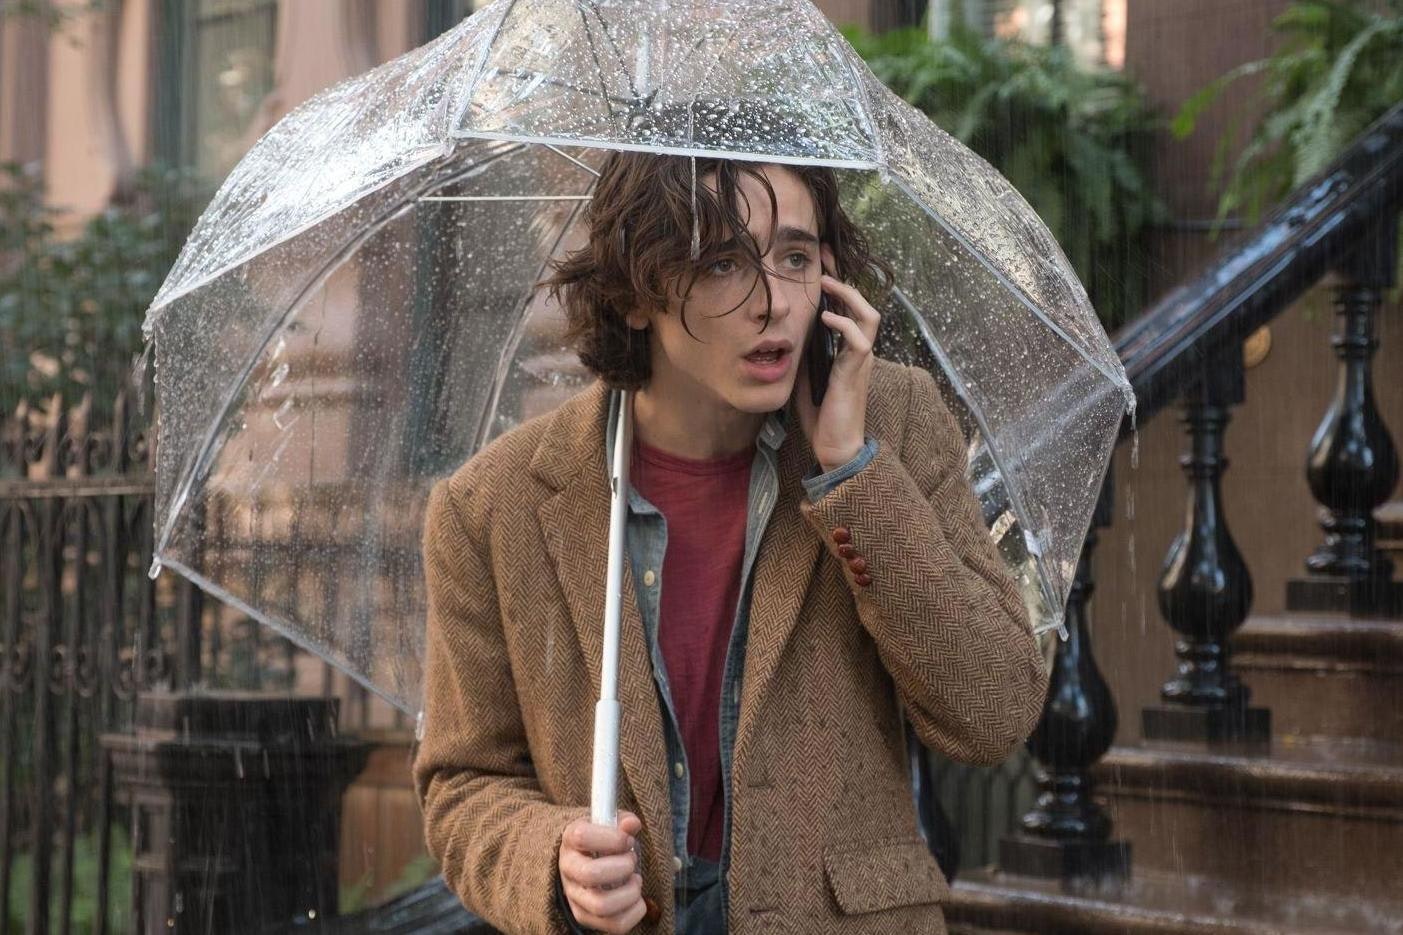 Review, Summary, Analysis: A Rainy Day in New York (2019) — Ashley